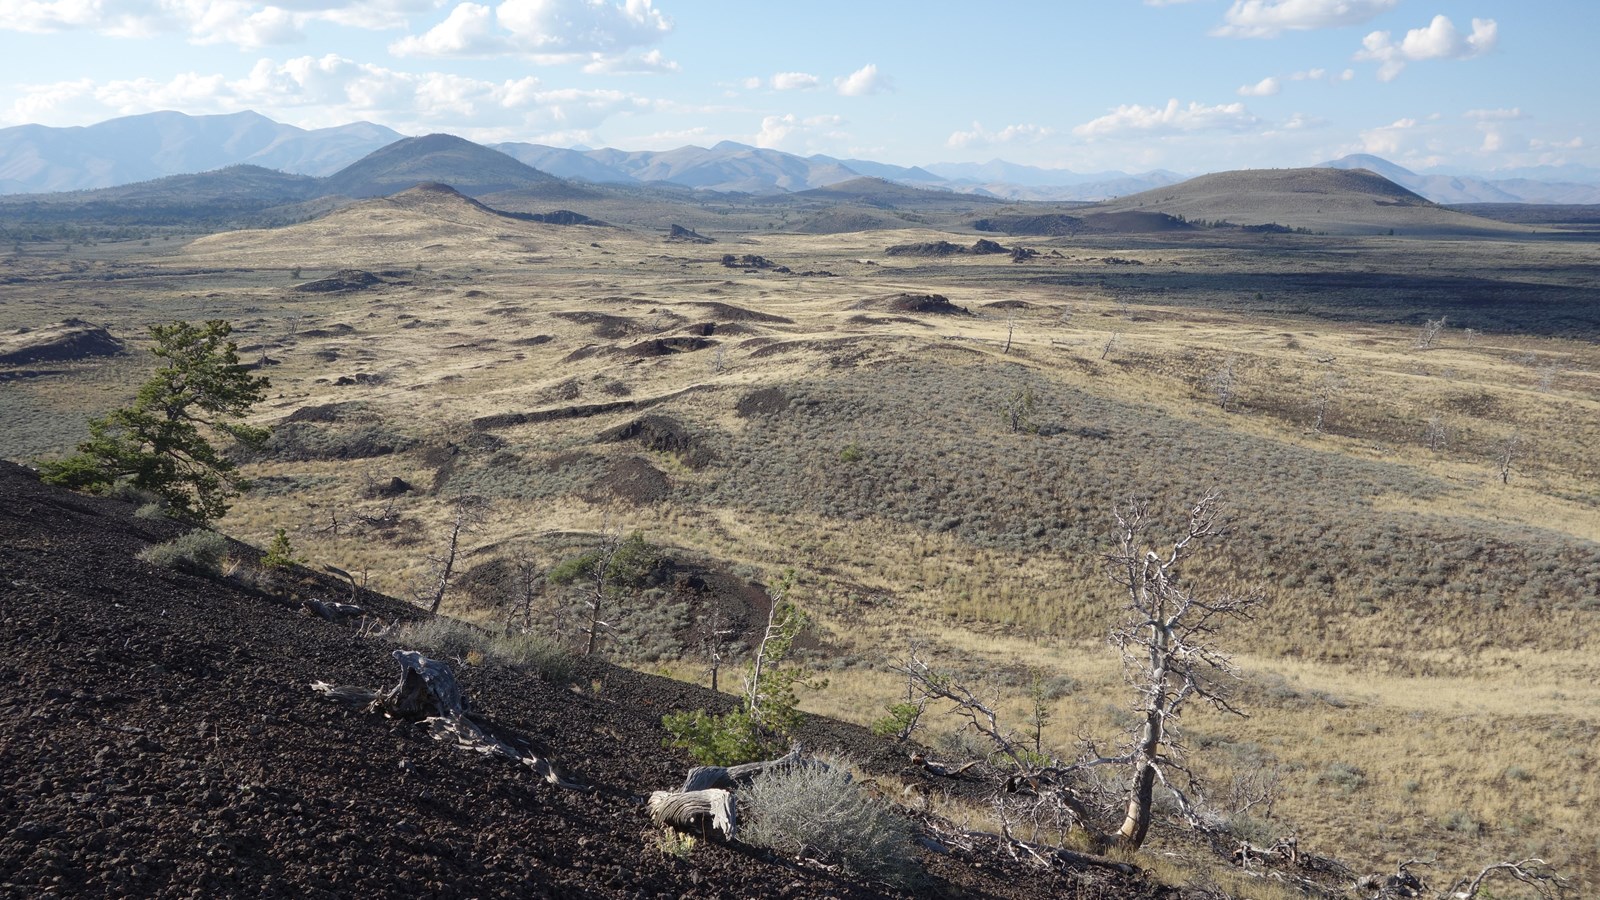 several cinder cones rising from a wide open sagebrush-covered landscape